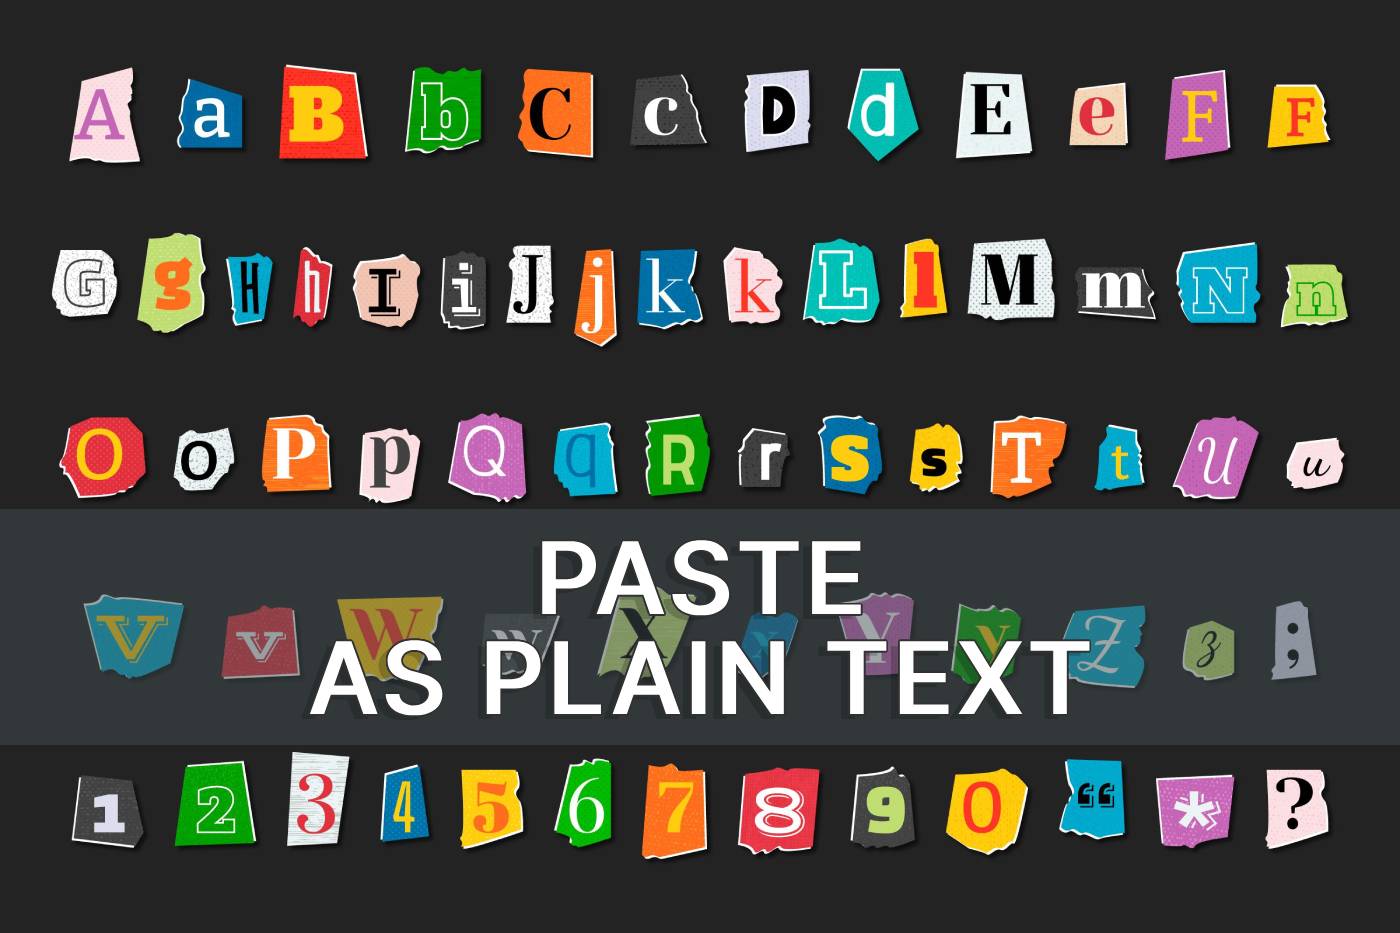 paste as plain text without formatting